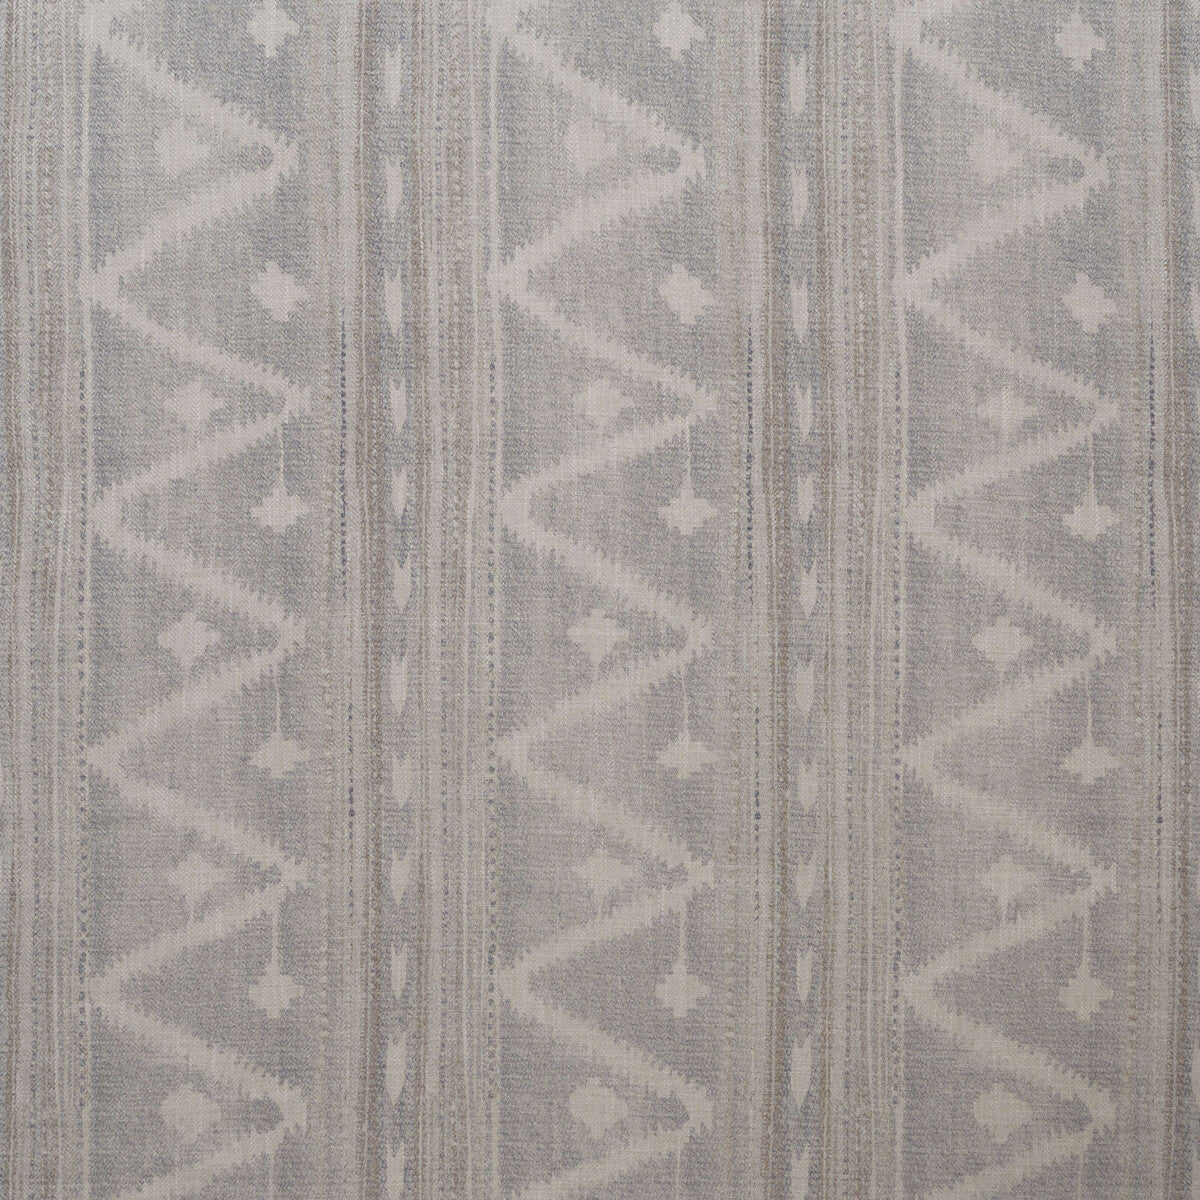 Babylon fabric in cloud color - pattern AM100340.11.0 - by Kravet Couture in the Andrew Martin Hindukush collection